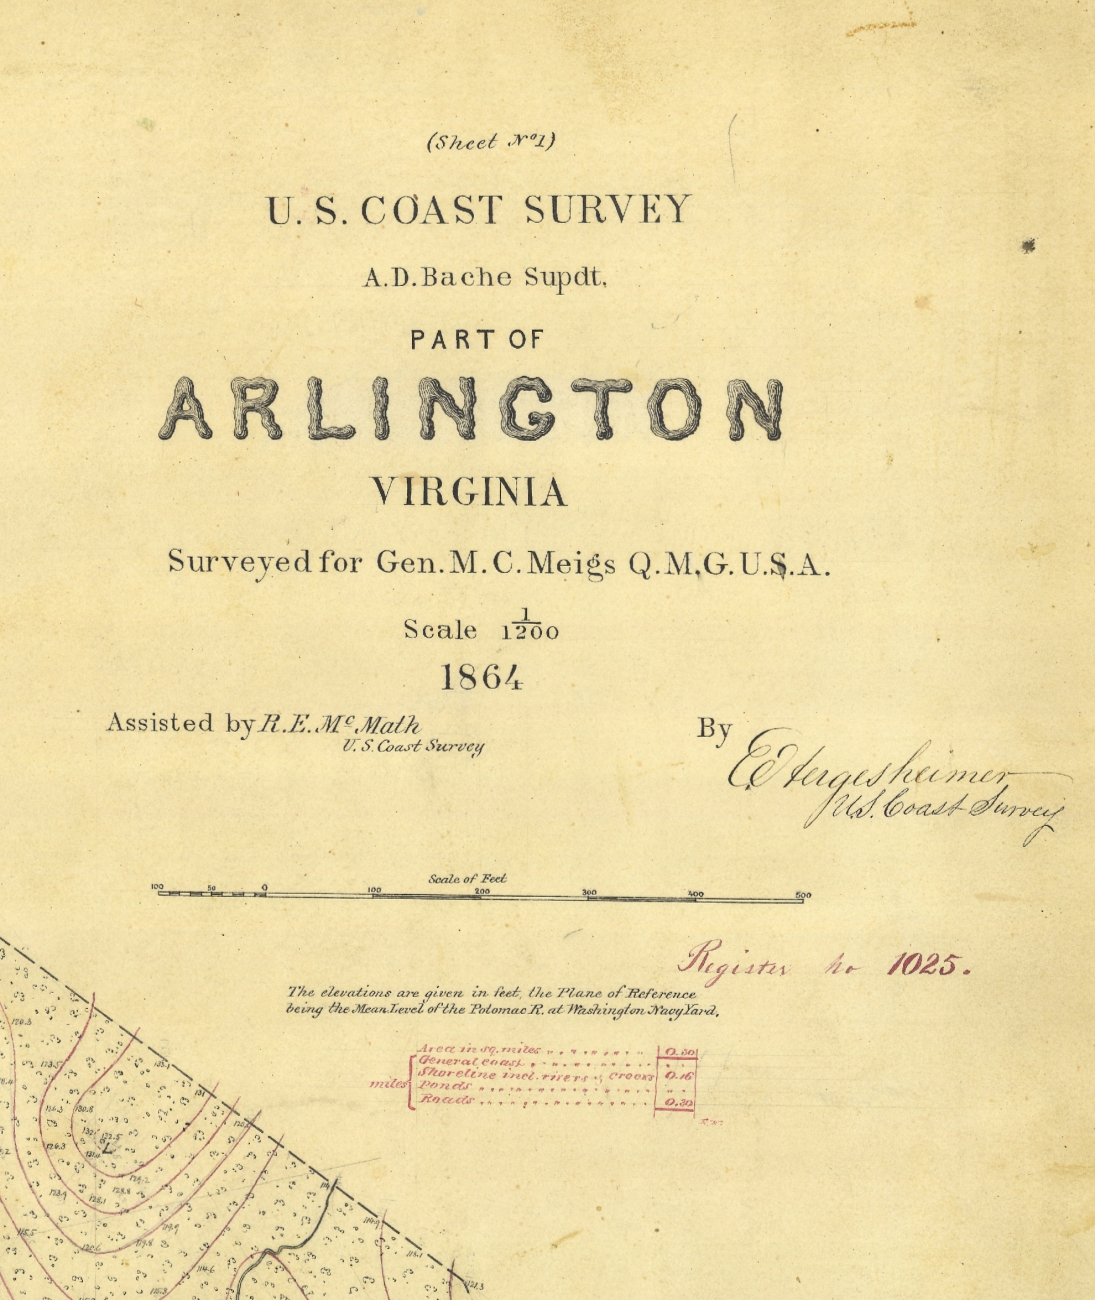 Title block to original survey of grounds of what became Arlington NationalCemetery